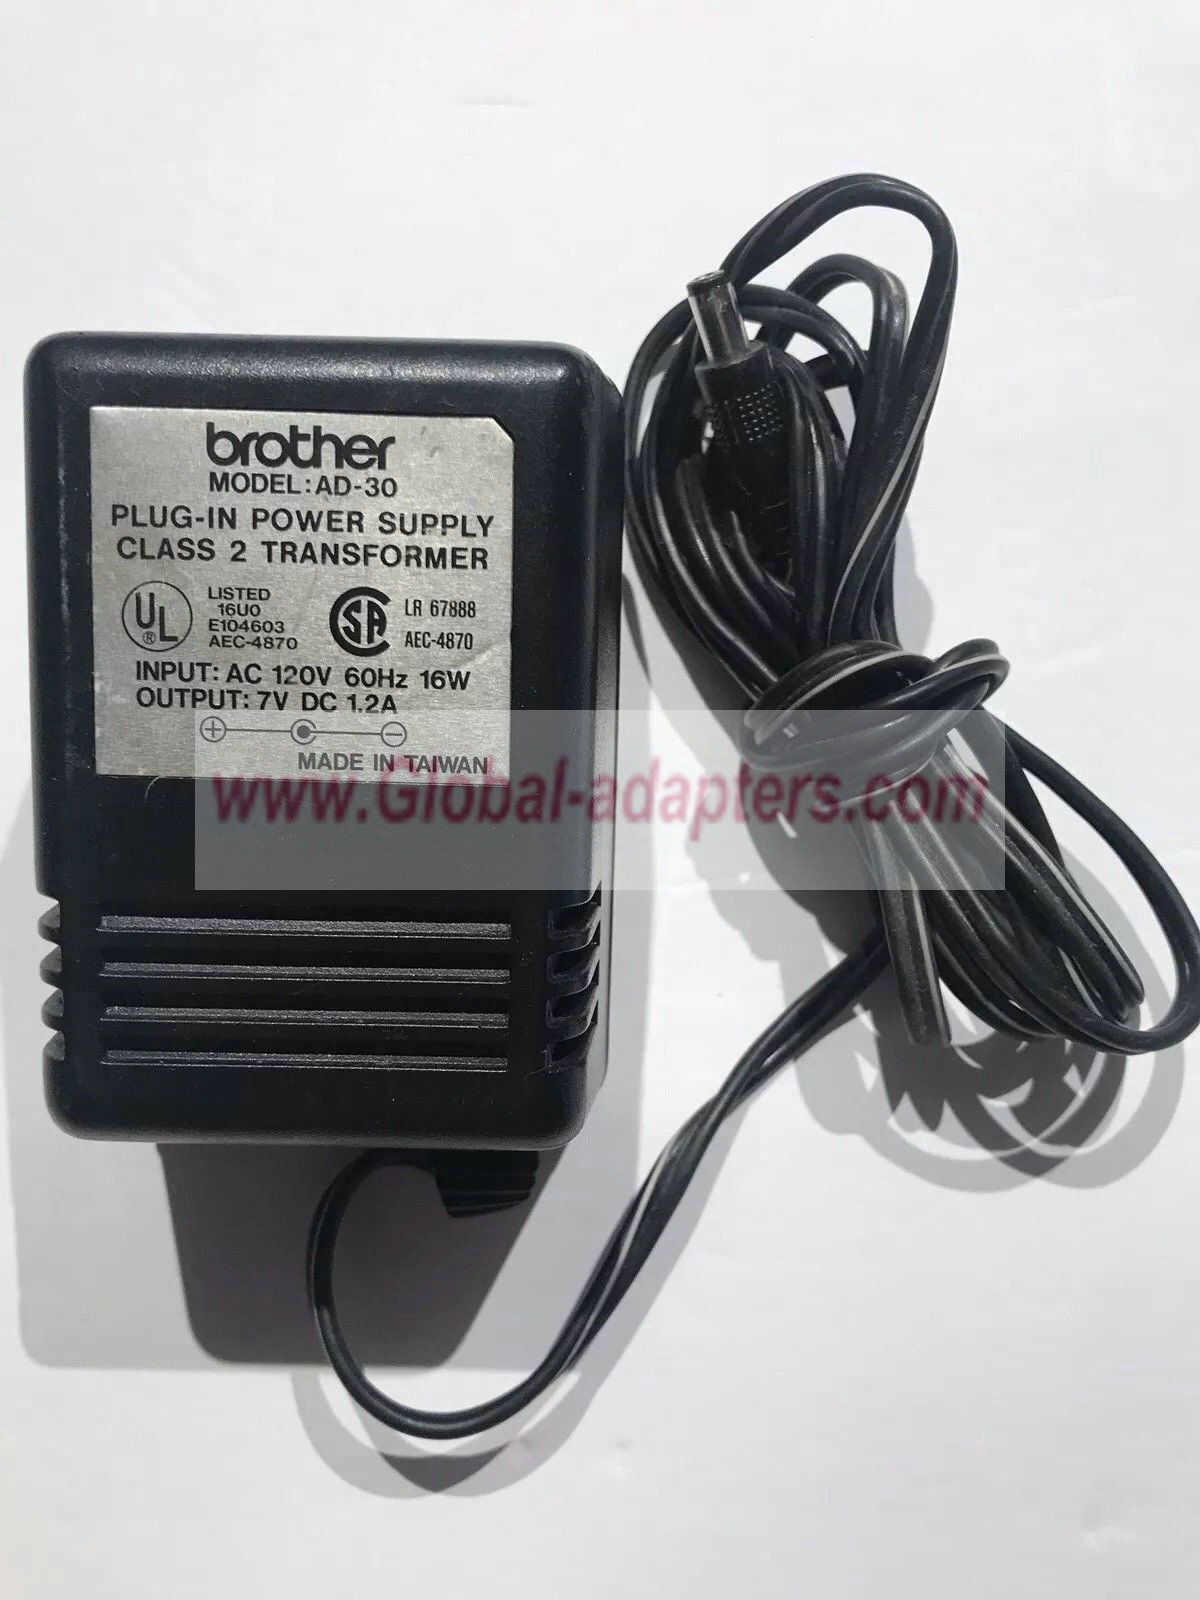 NEW 7V 1.2A Brother AD-30 P-touch Label Maker B-00000 Power Supply AC Adapter Charger